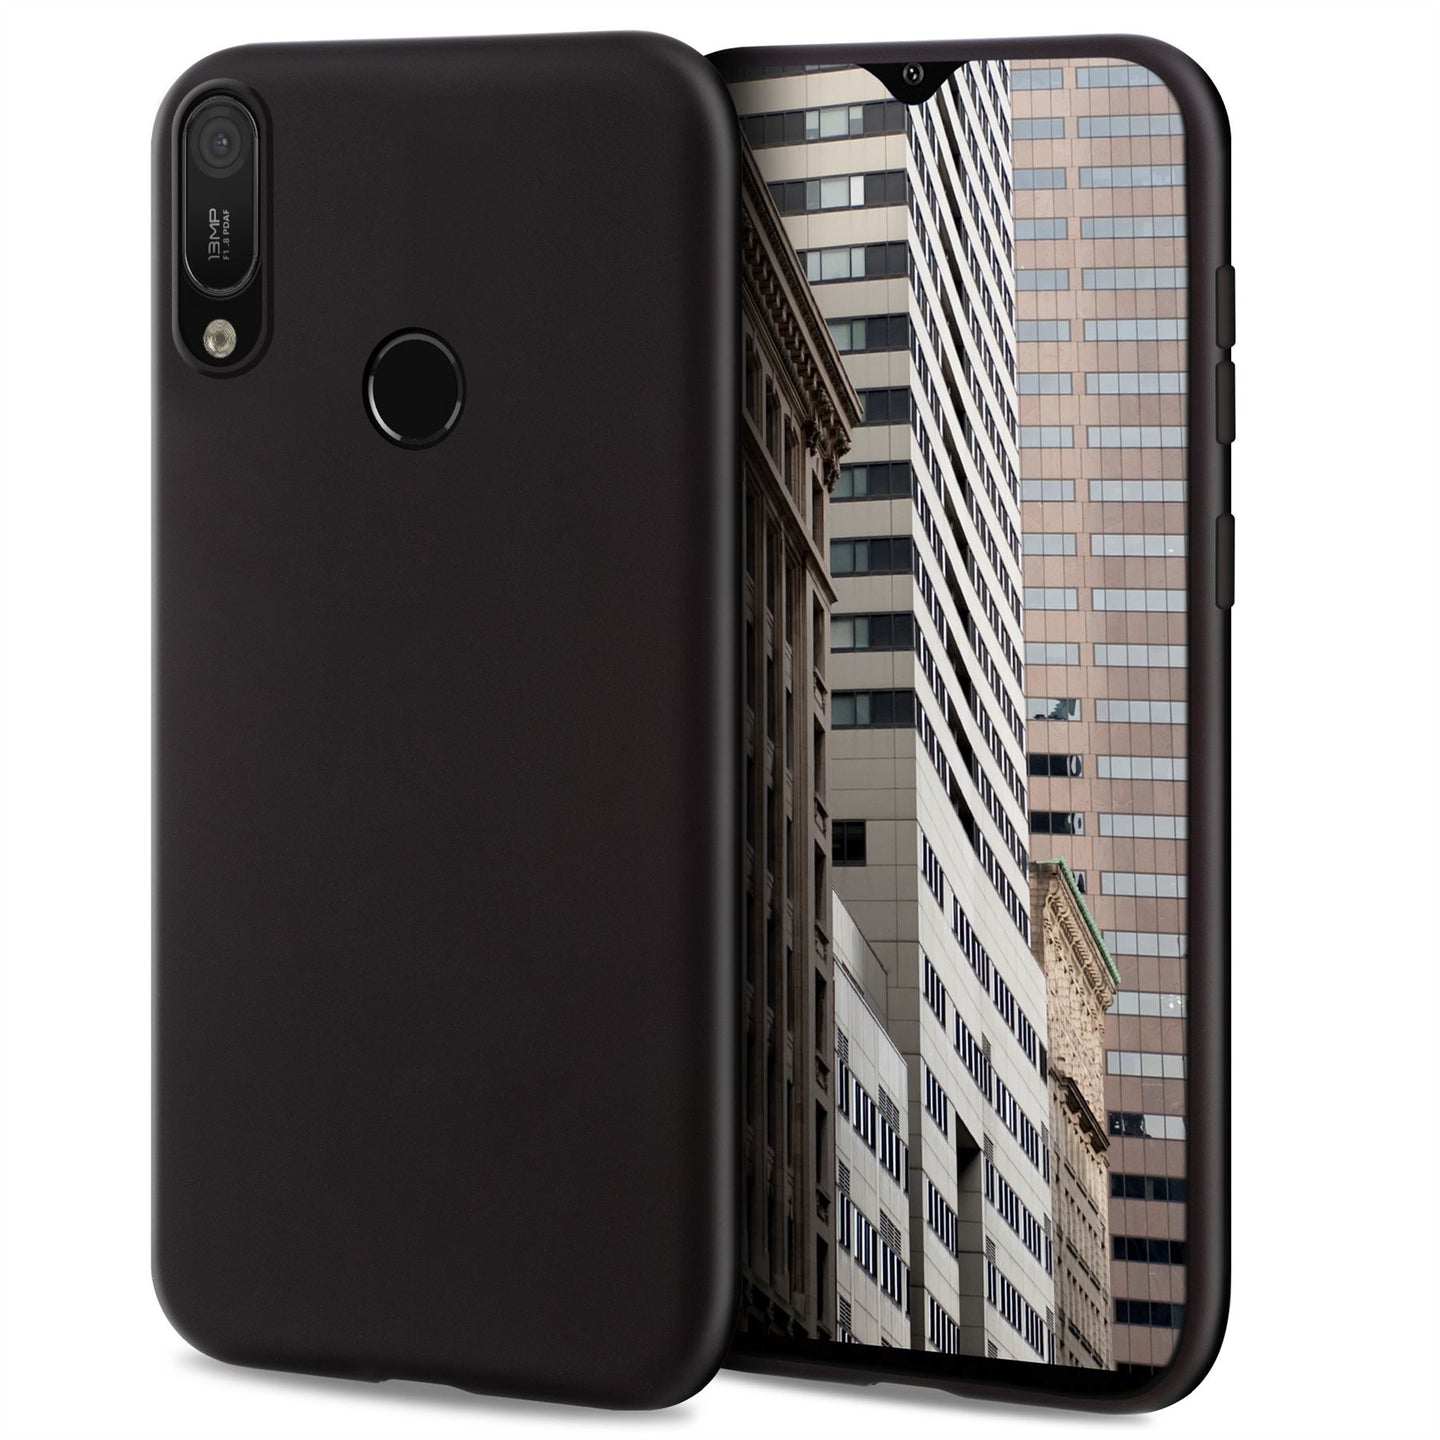 Moozy Lifestyle. Designed for Huawei Y6 2019 Case, Black - Liquid Silicone Cover with Matte Finish and Soft Microfiber Lining